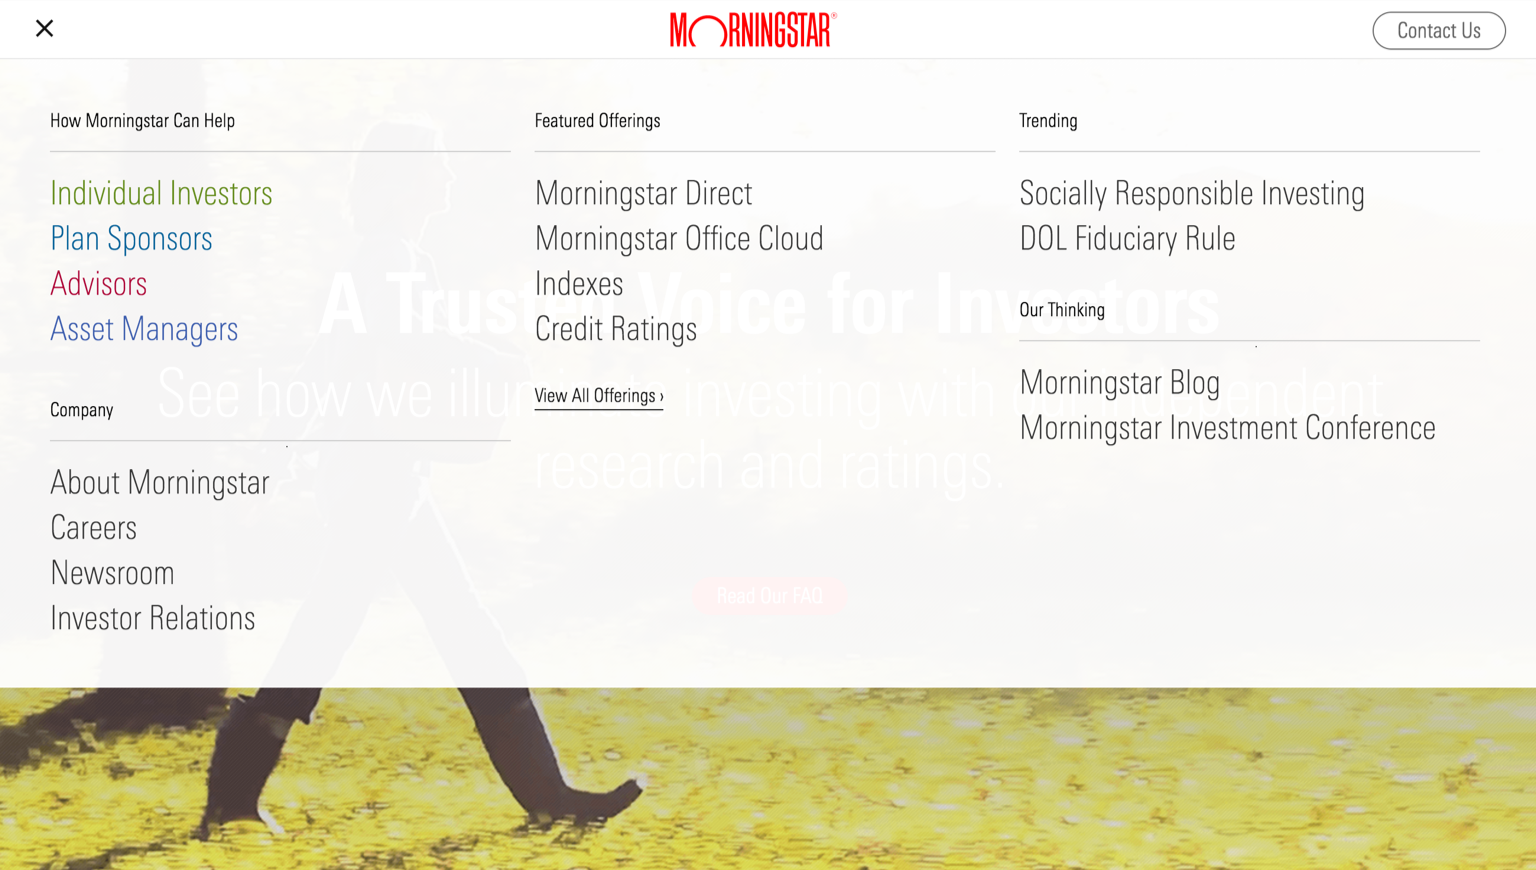 Example of a navigation container on the Morningstar company site.